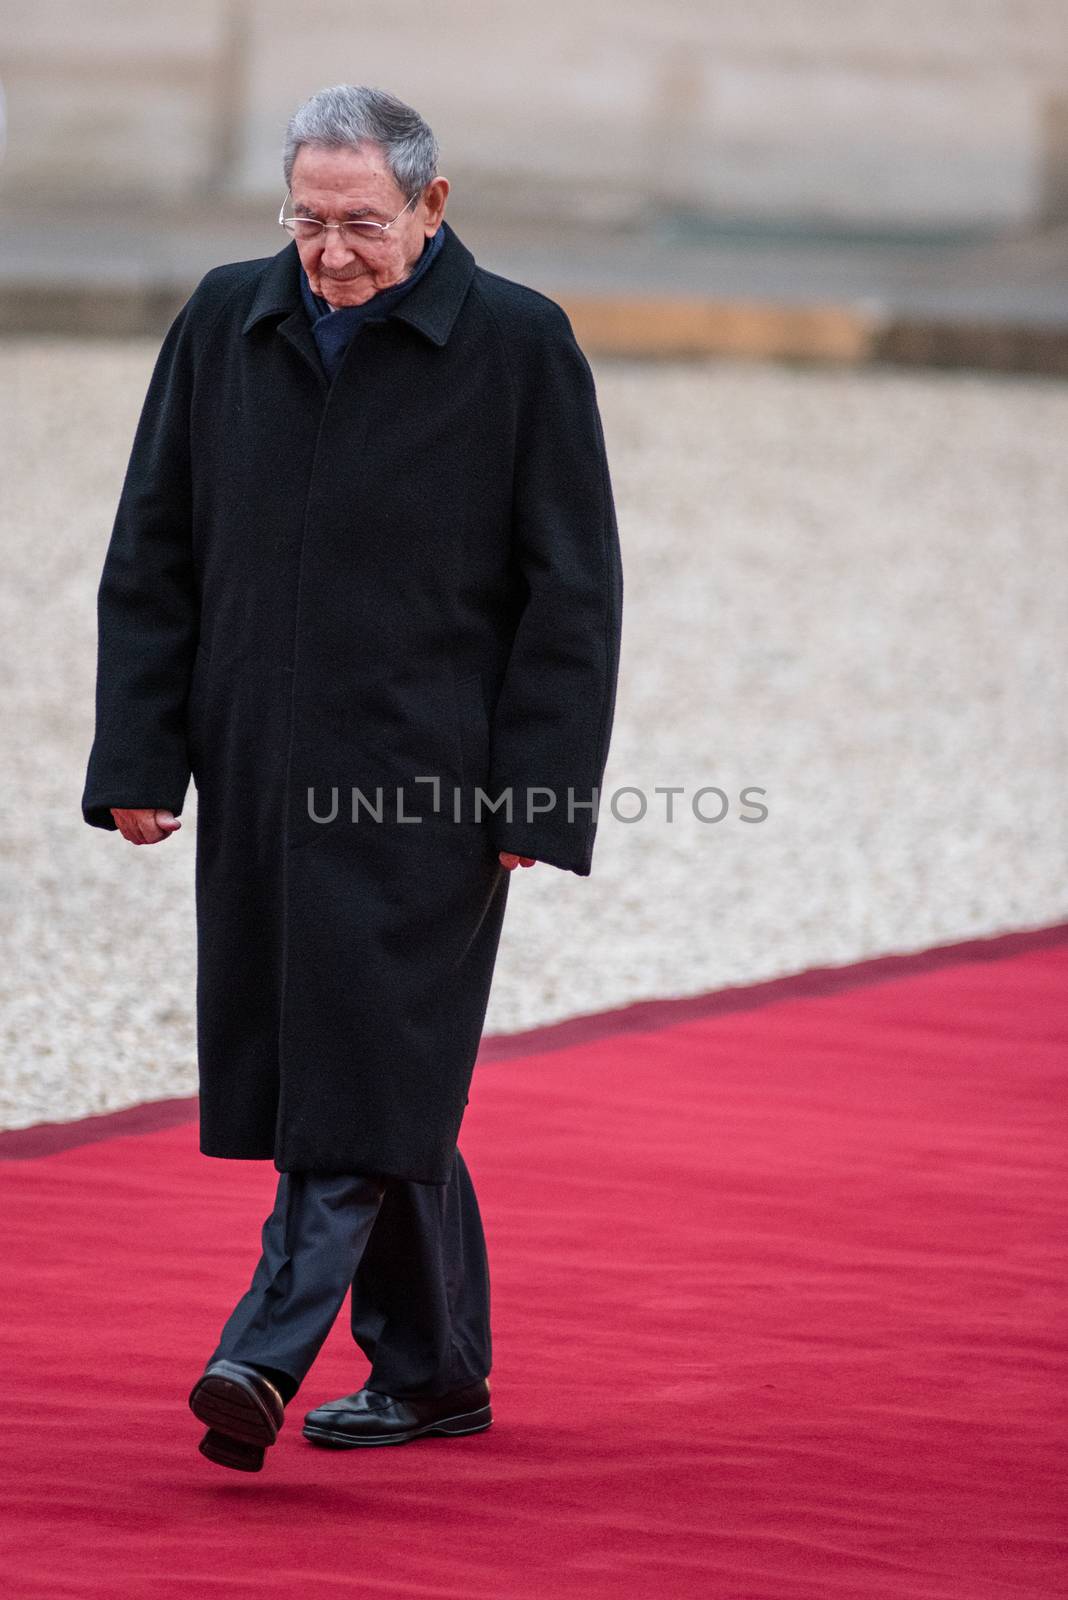 FRANCE, Paris: Cuban President Raul Castro arrives at the Elysee palace, in Paris, on February 1, 2016, to attend an official meeting with French President Francois Hollande. Cuban President Raul Castro begins an official state visit to France, his first ever to Europe, which is being seen as a key step in rebuilding his island nation's ties with the West.